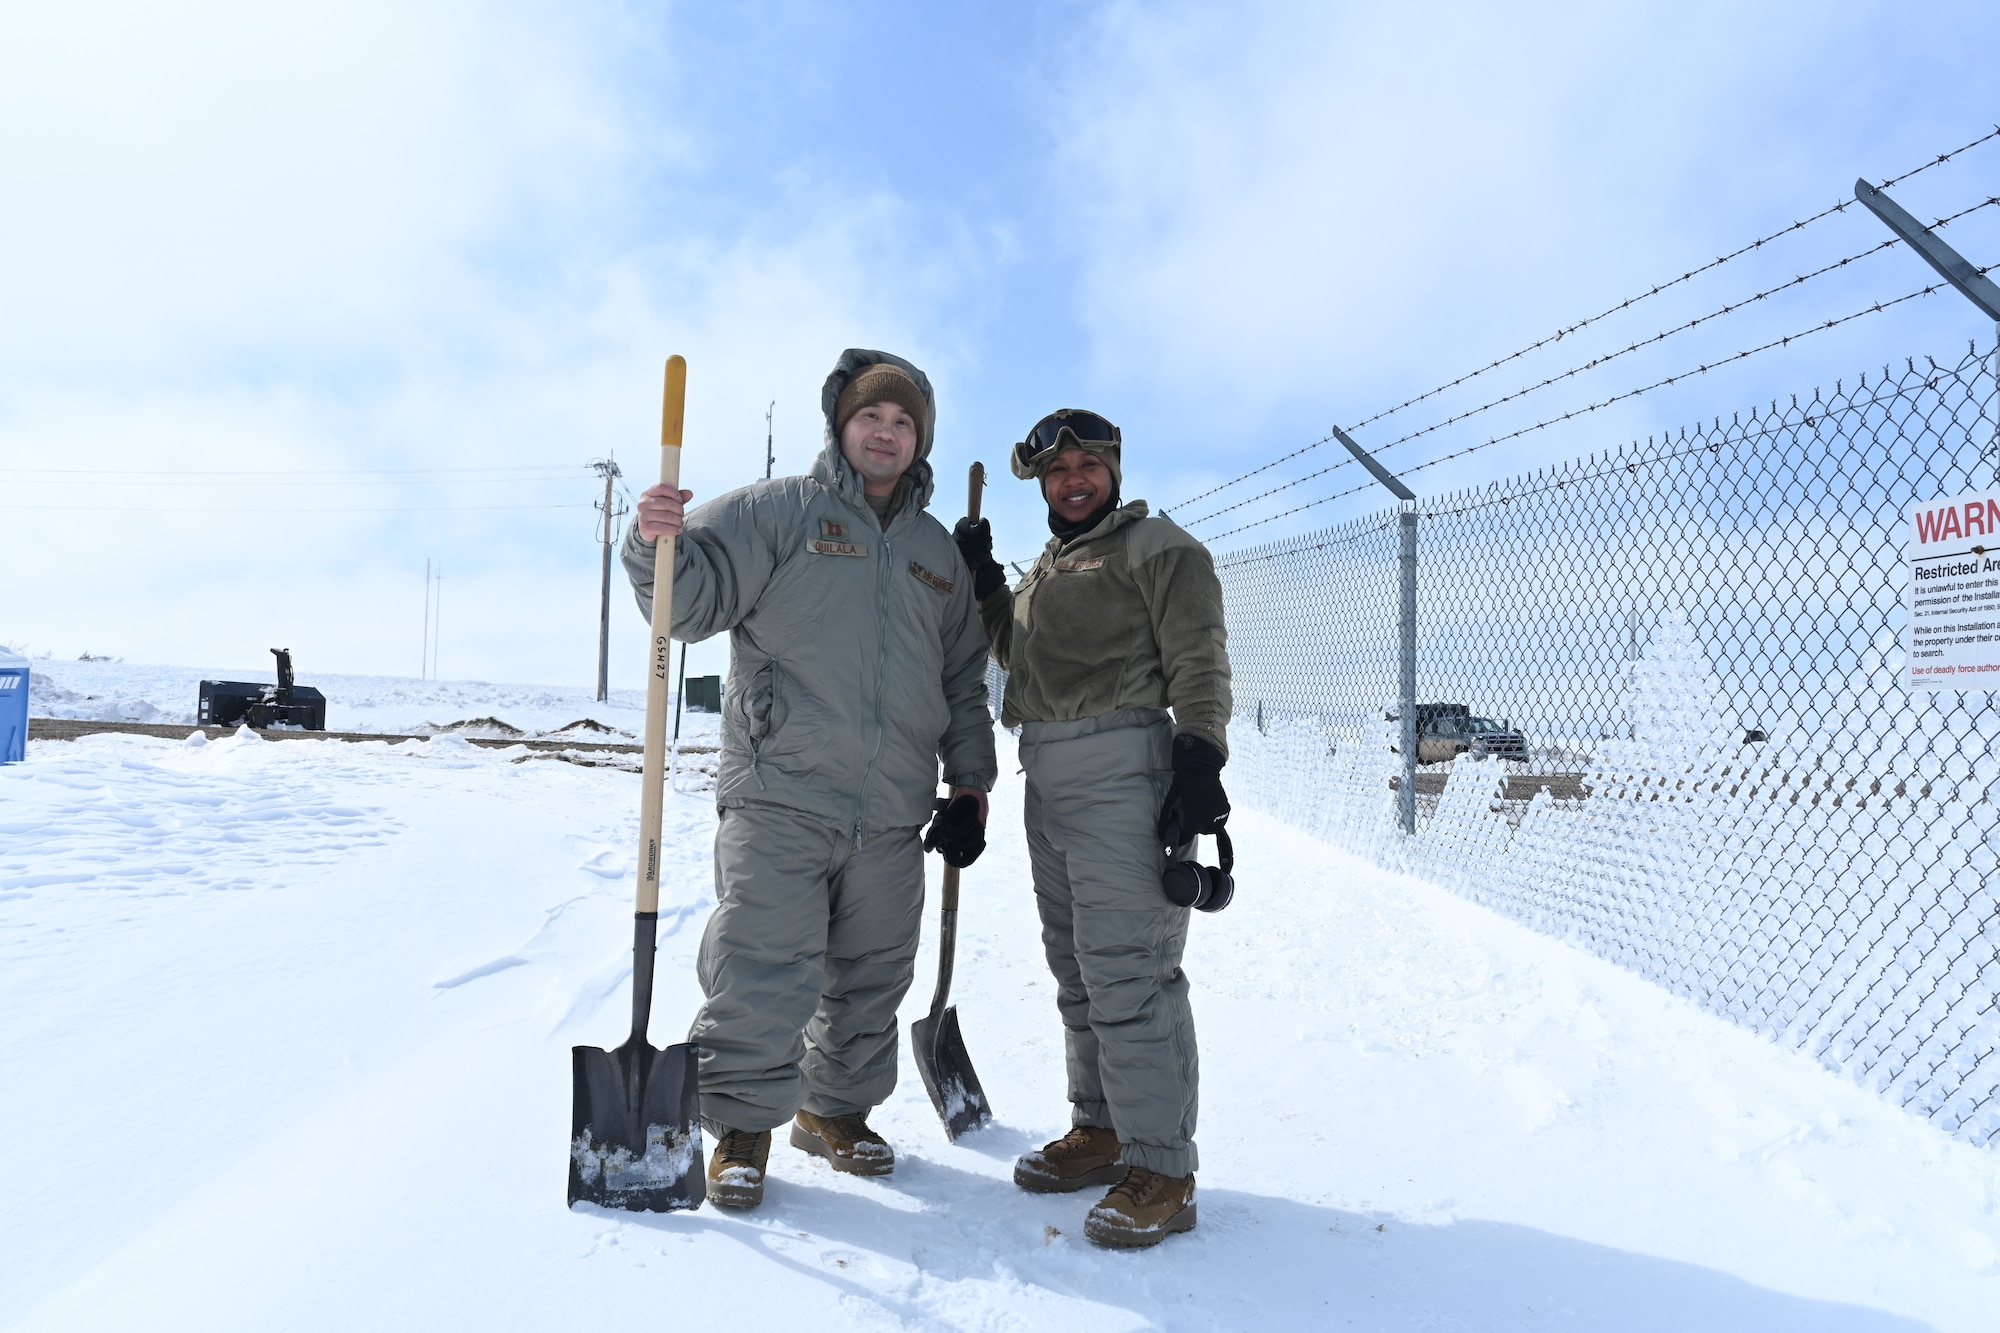 Two U.S. Air Force Airmen assigned to the 91st Missile Wing take a break from snow clearing and ditch digging at a launch facility at Minot Air Force Base, North Dakota, April 26, 2022.